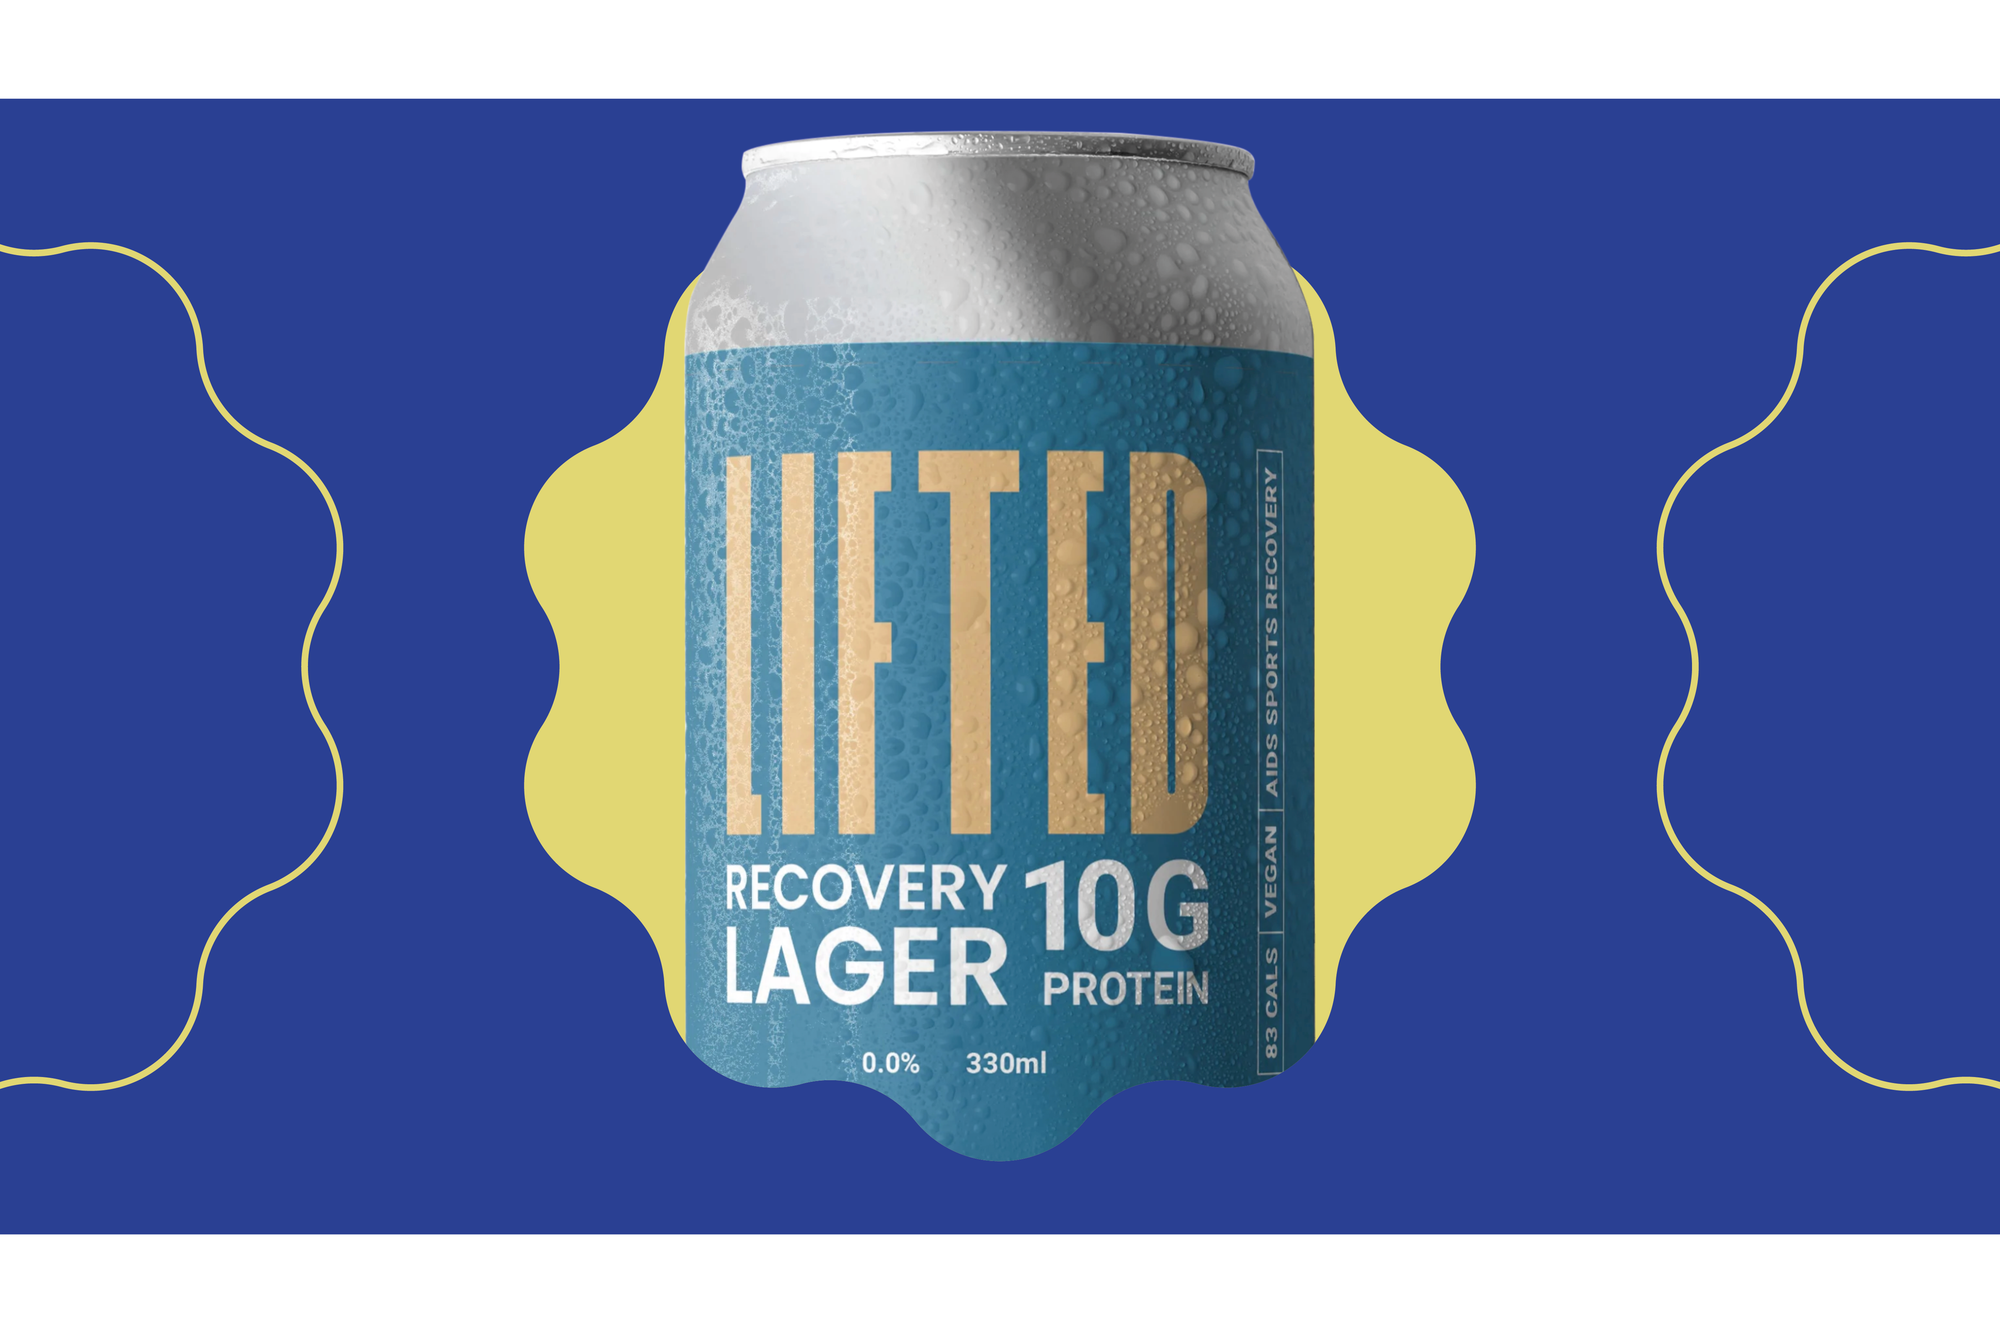 Introducing LIFTED and their alcohol-free protein based Recovery Lager